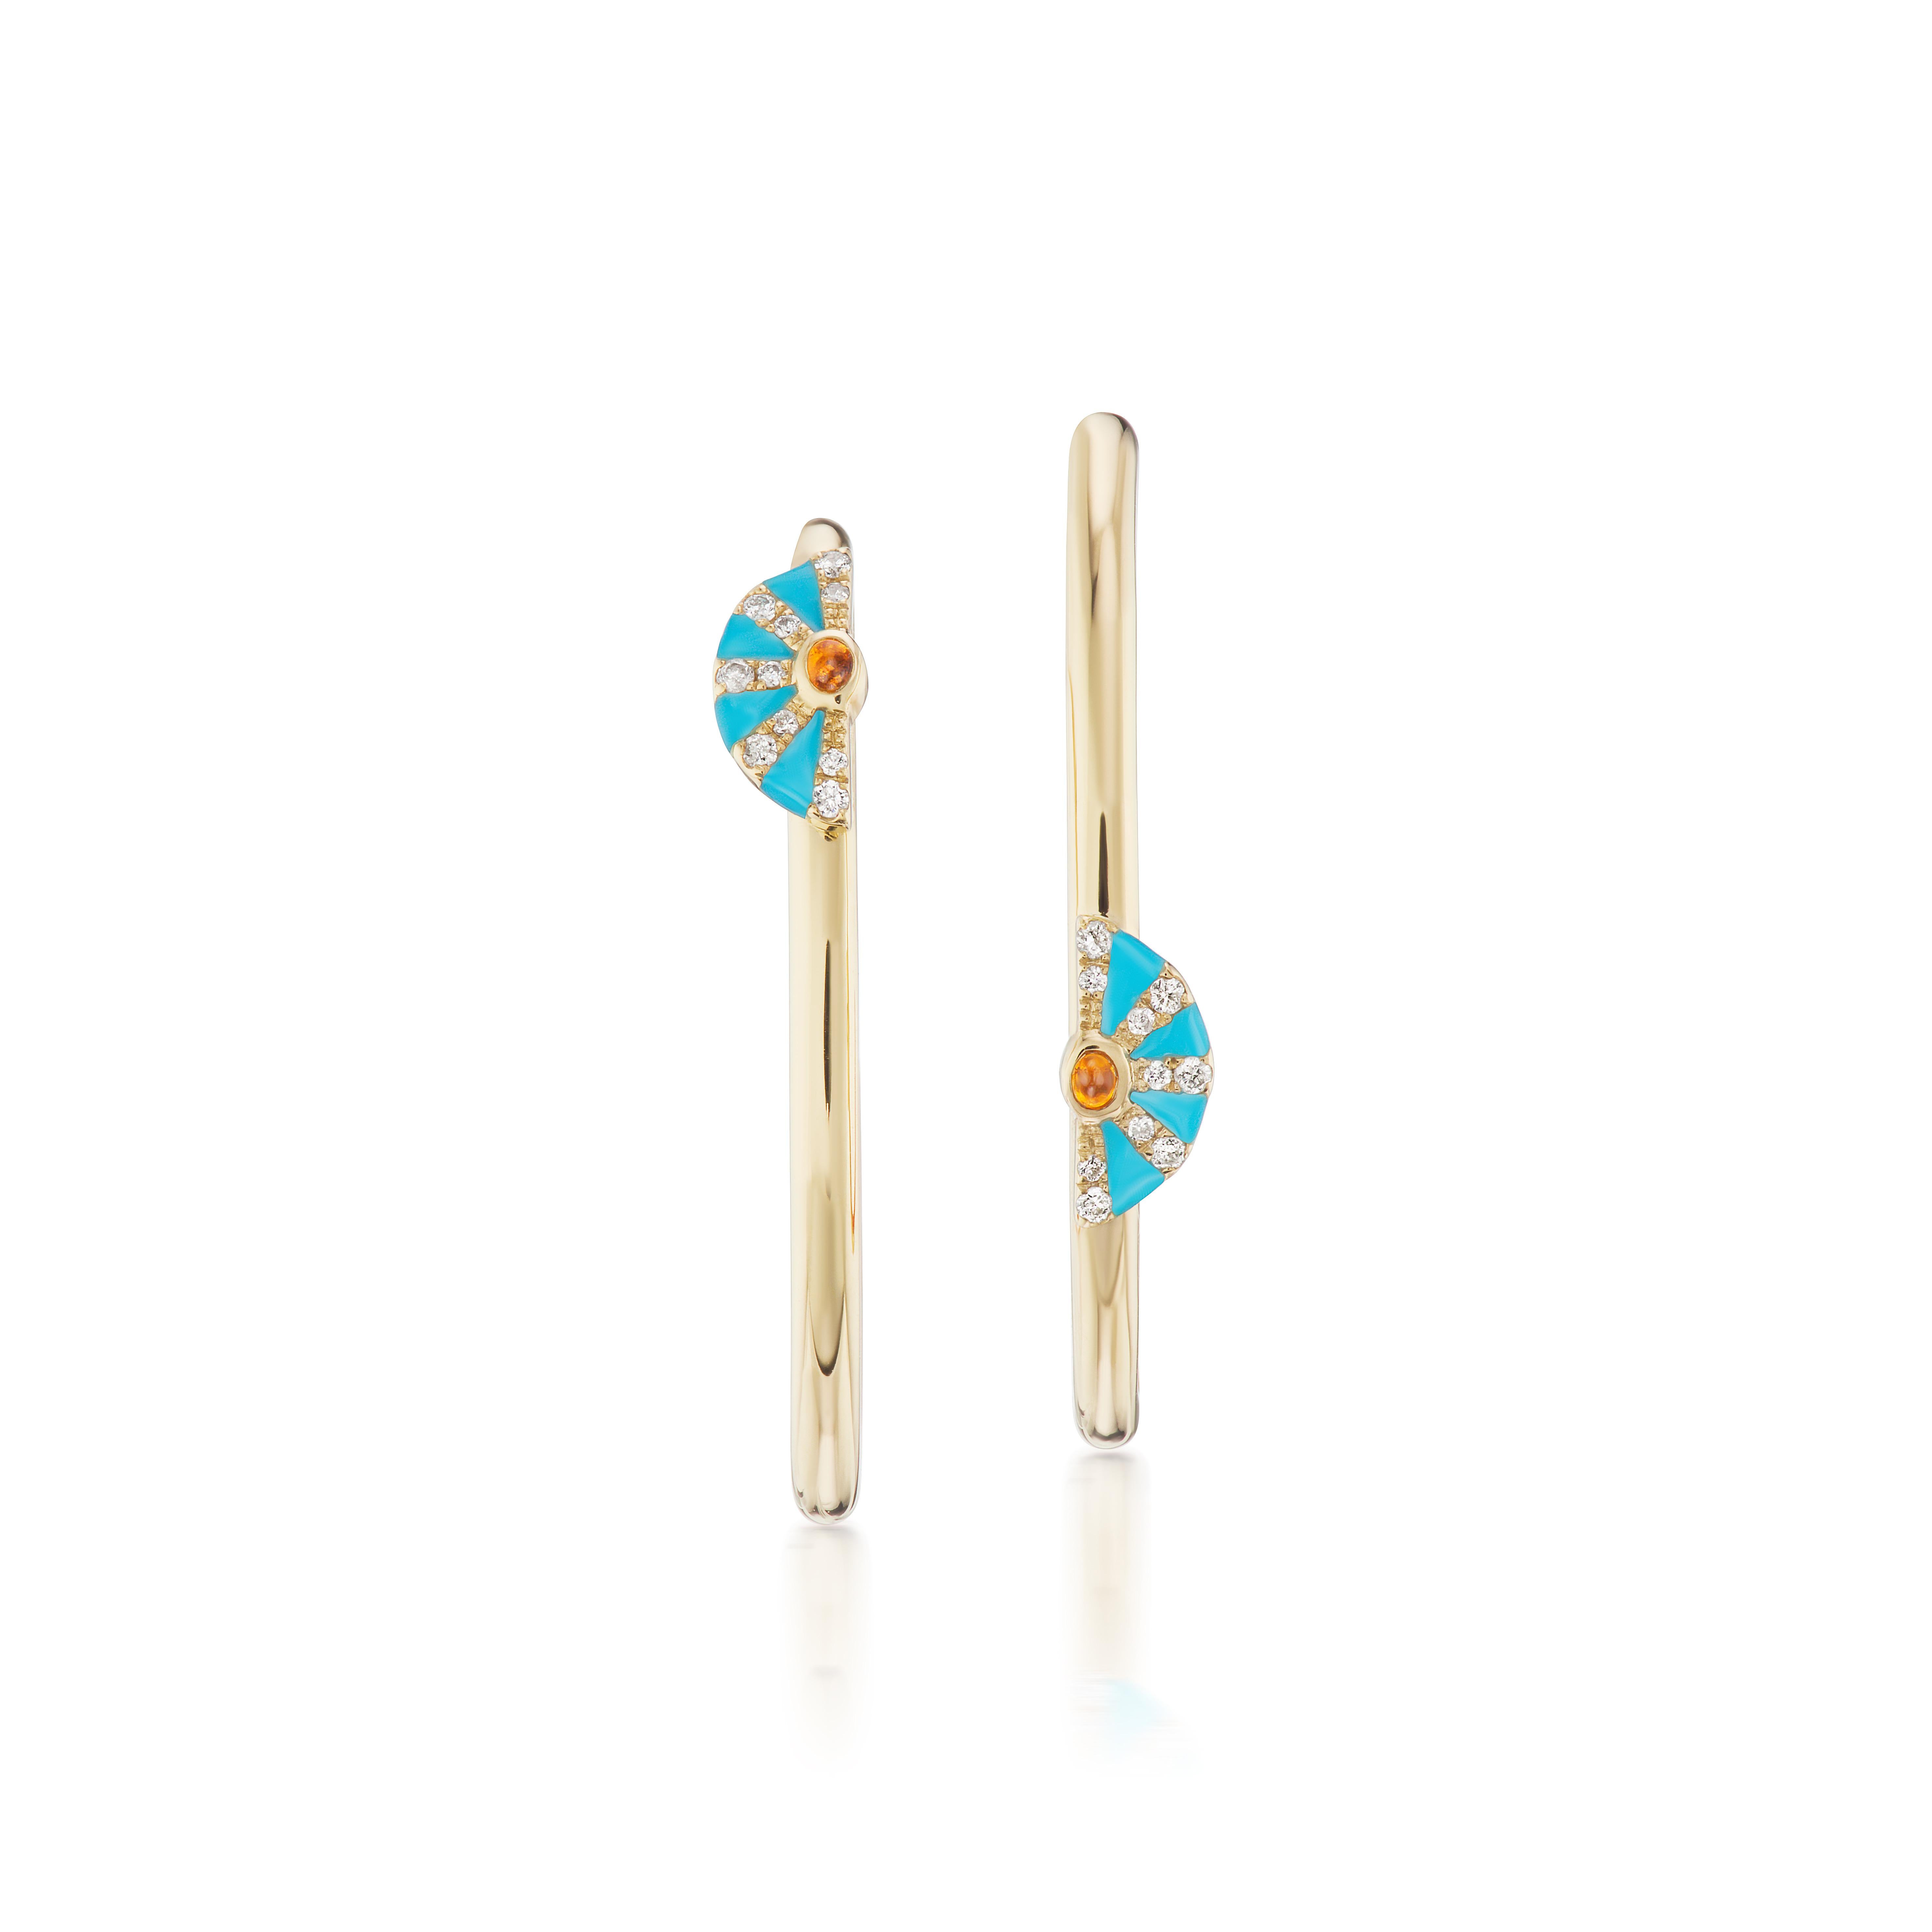 The Four Elements Fire Hoop Earrings illustrate the creative nature that ignites our passions through its bold imagery. A fire opal center emblazoned in the rising sun is surrounded by magnificent rays playfully sparkling against an enamel blue sky.